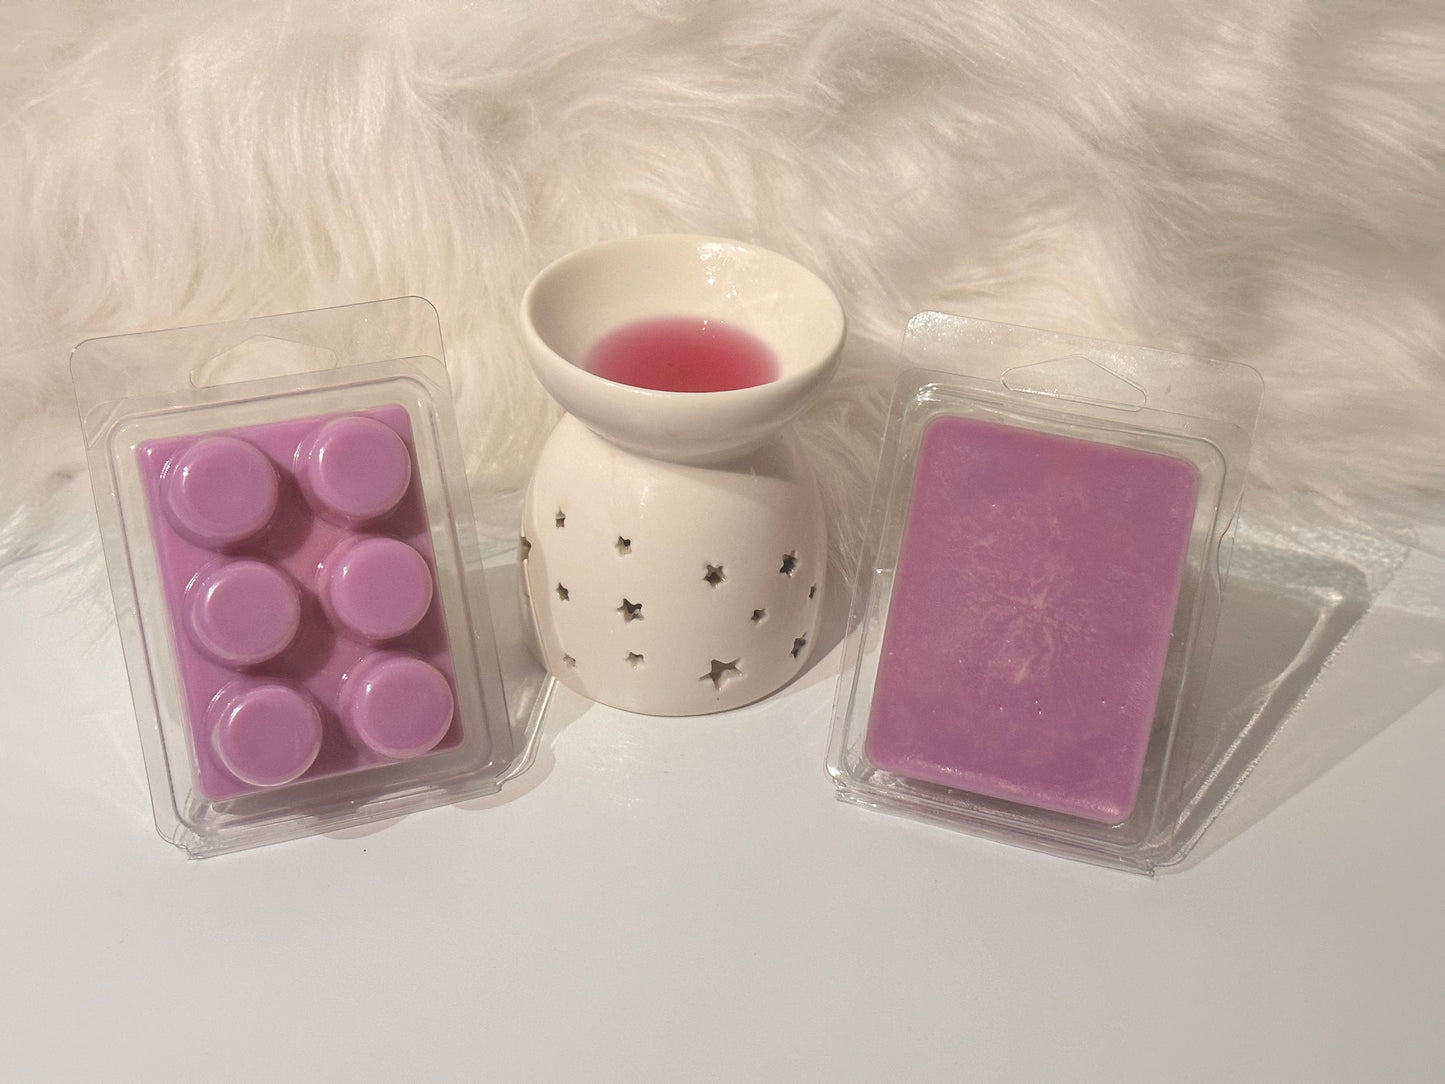 Lavender Heart Wax Melt Bars: Experience Tranquility in Every Melting Moment